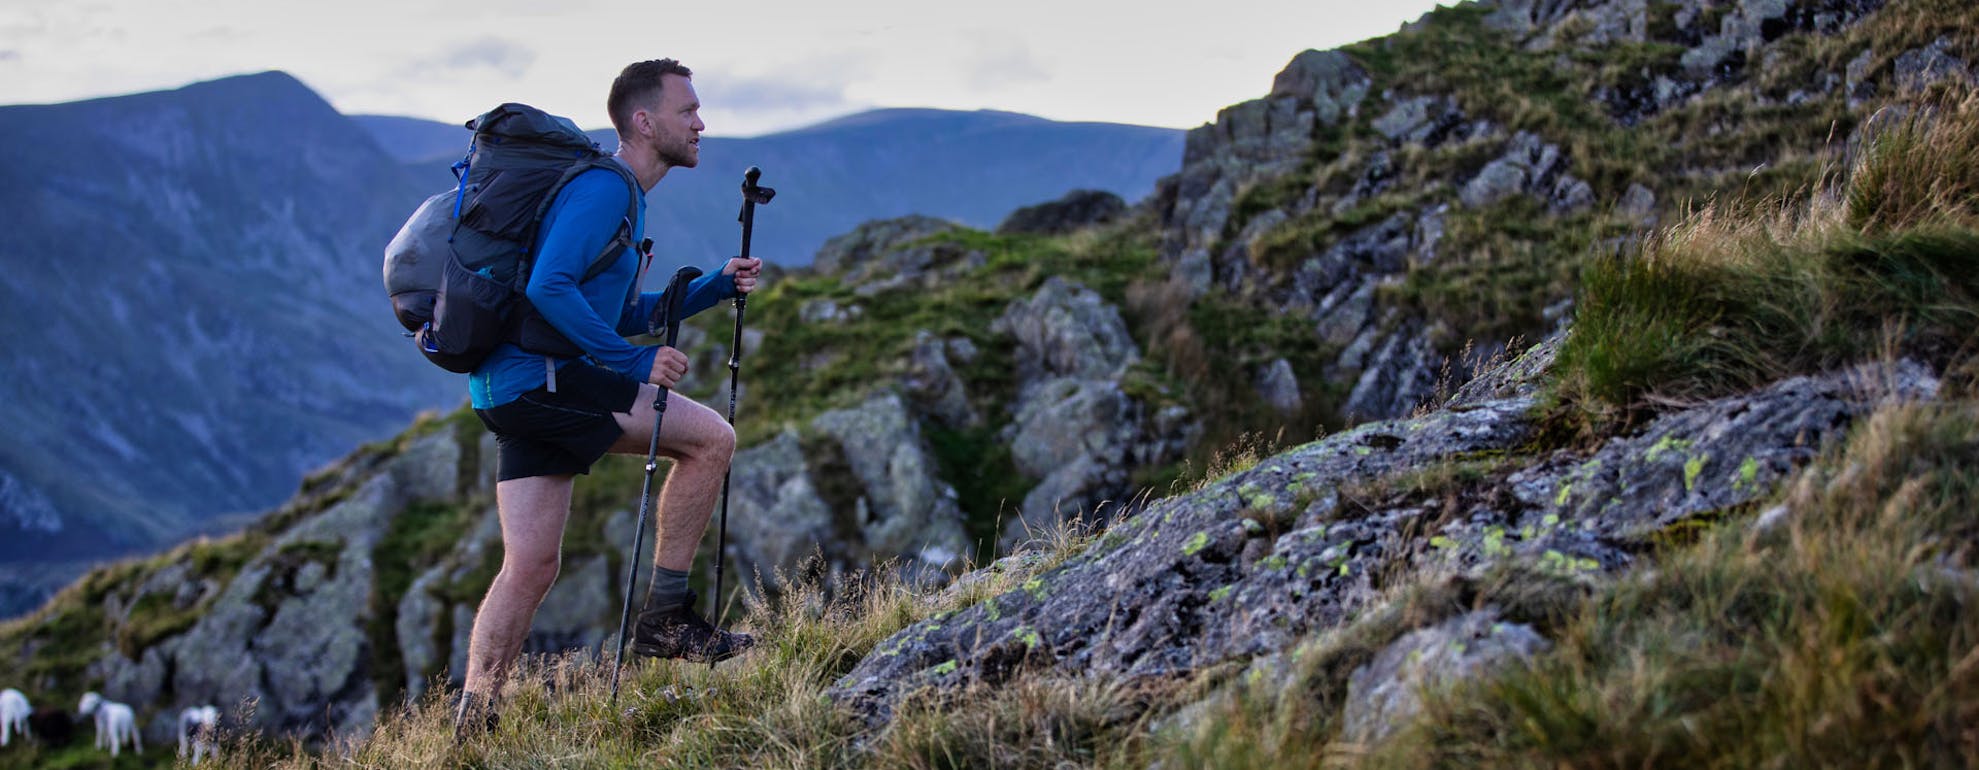 q-and-a-with-wainwrights-round-record-holder-james-forrest